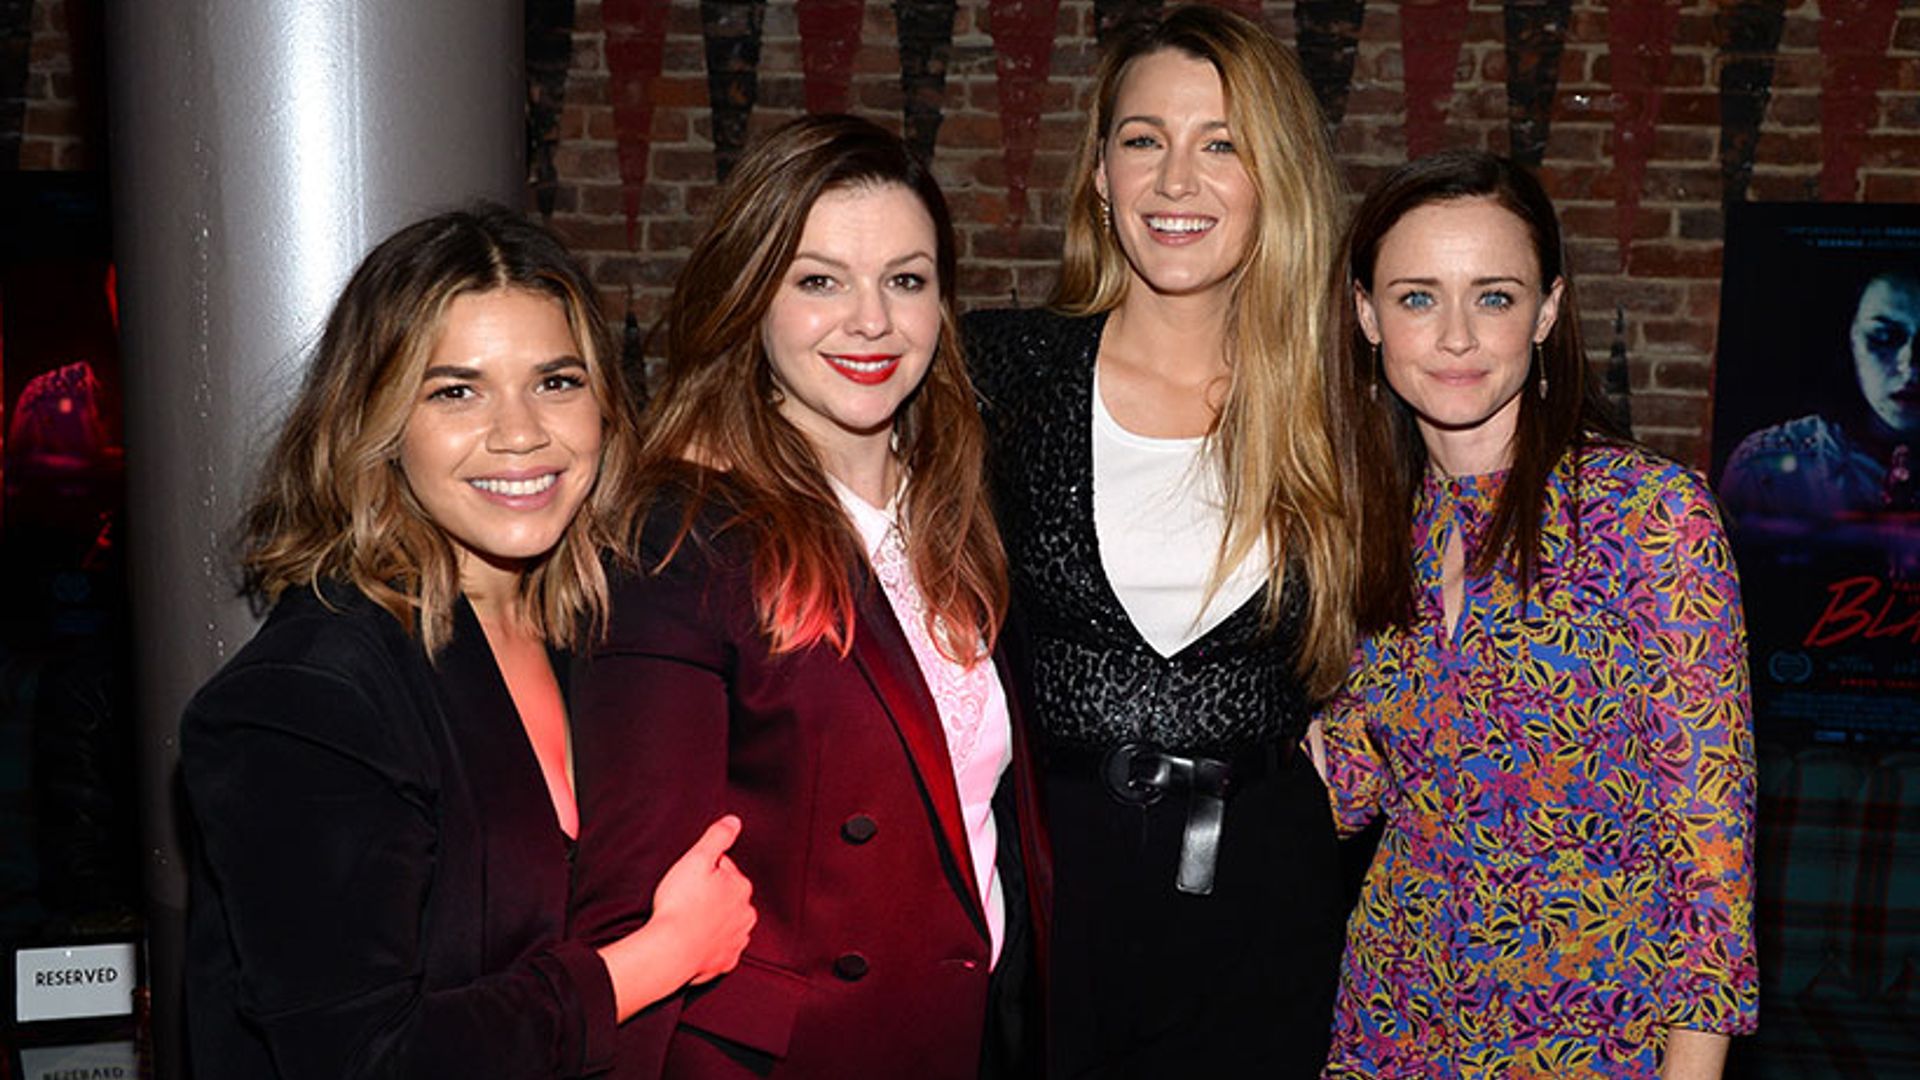 Ugly Betty's America Ferrera reunites with Sisterhood co-stars after pregnancy announcement